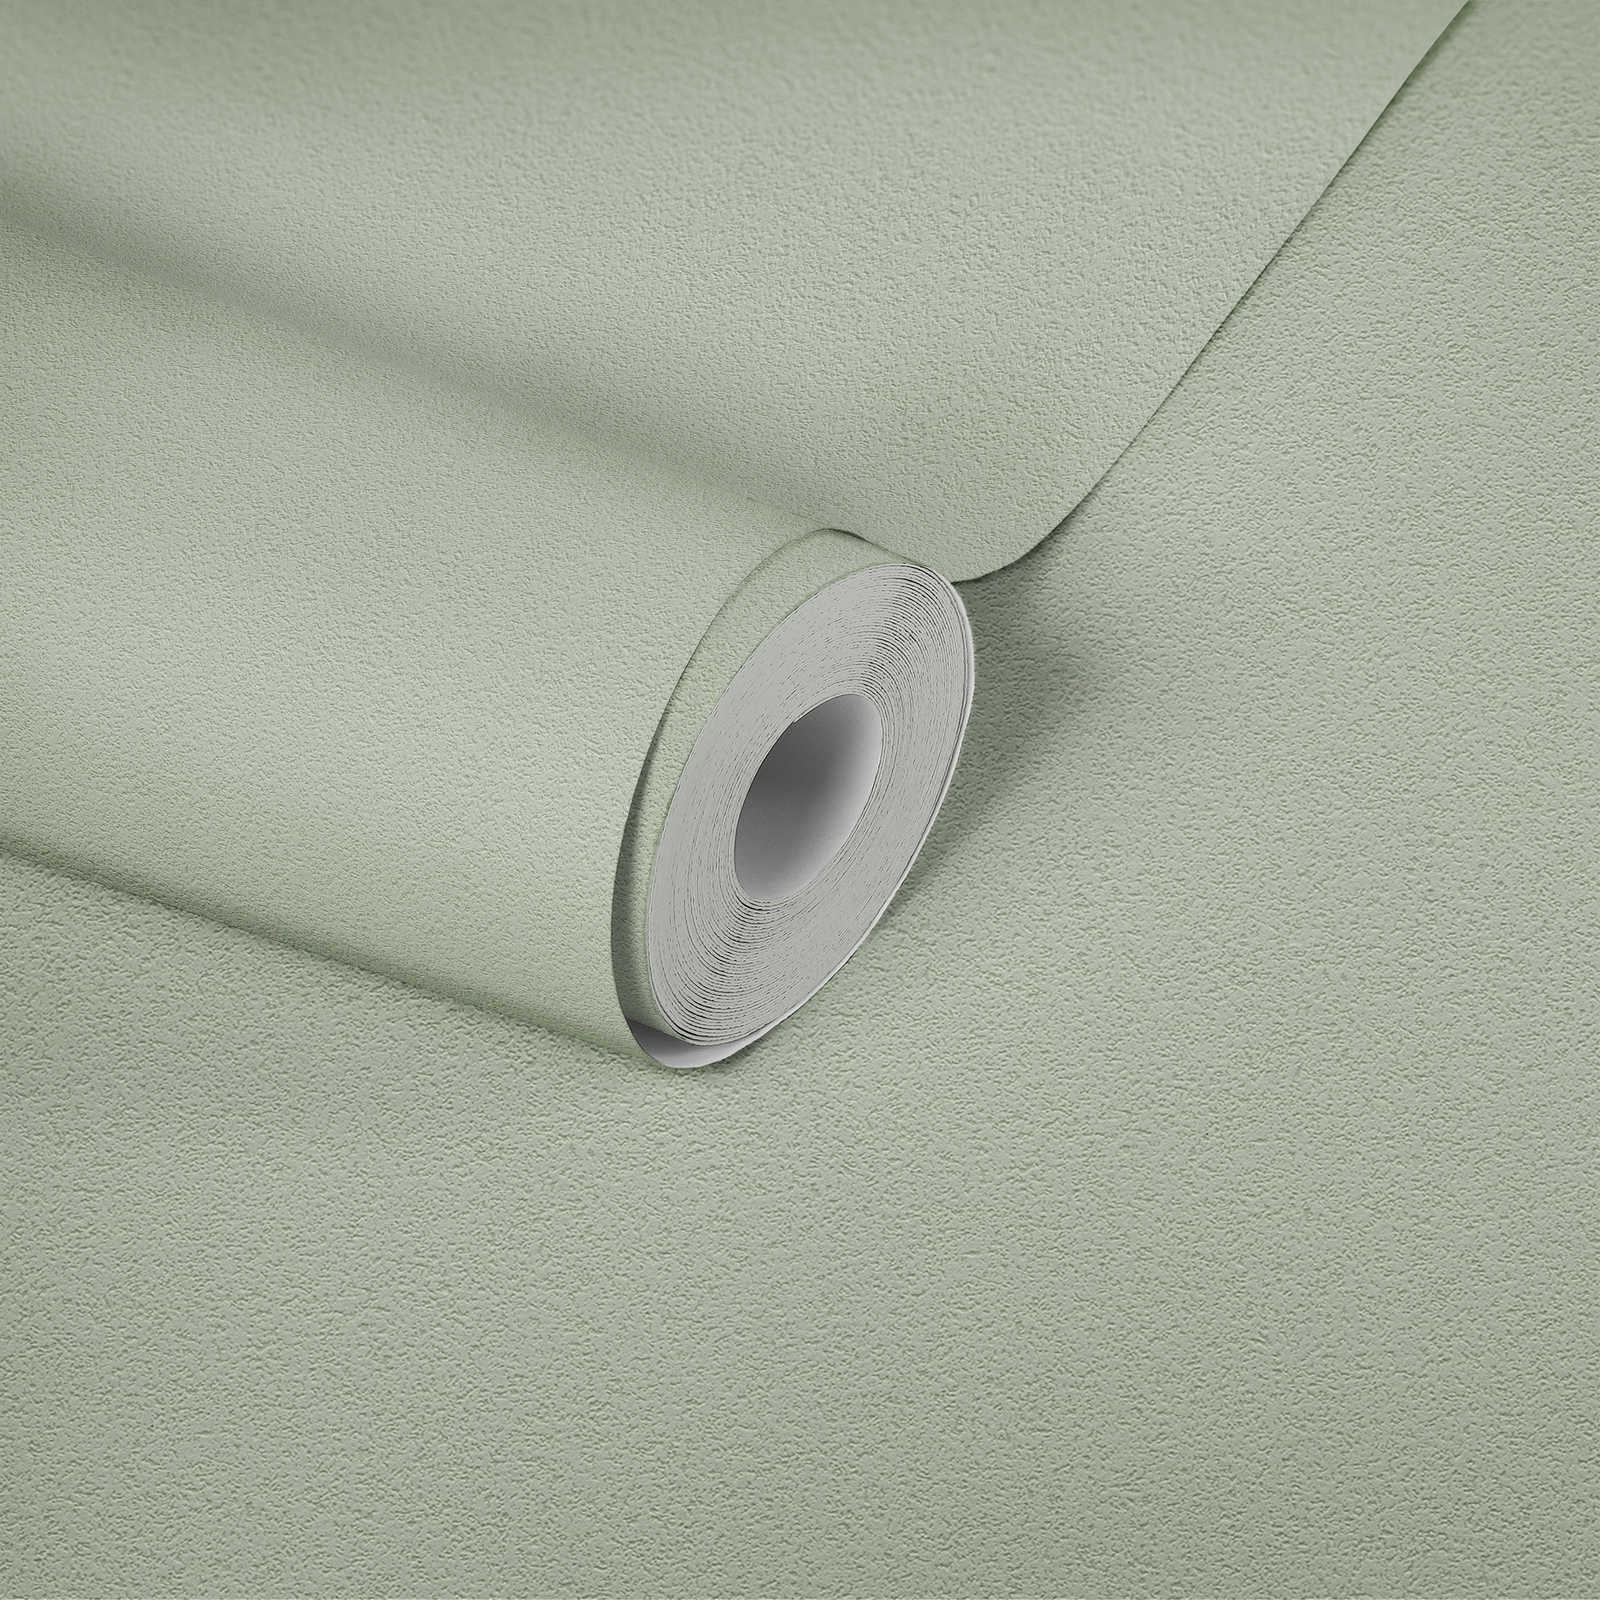             Plain wallpaper with fine surface texture - green
        